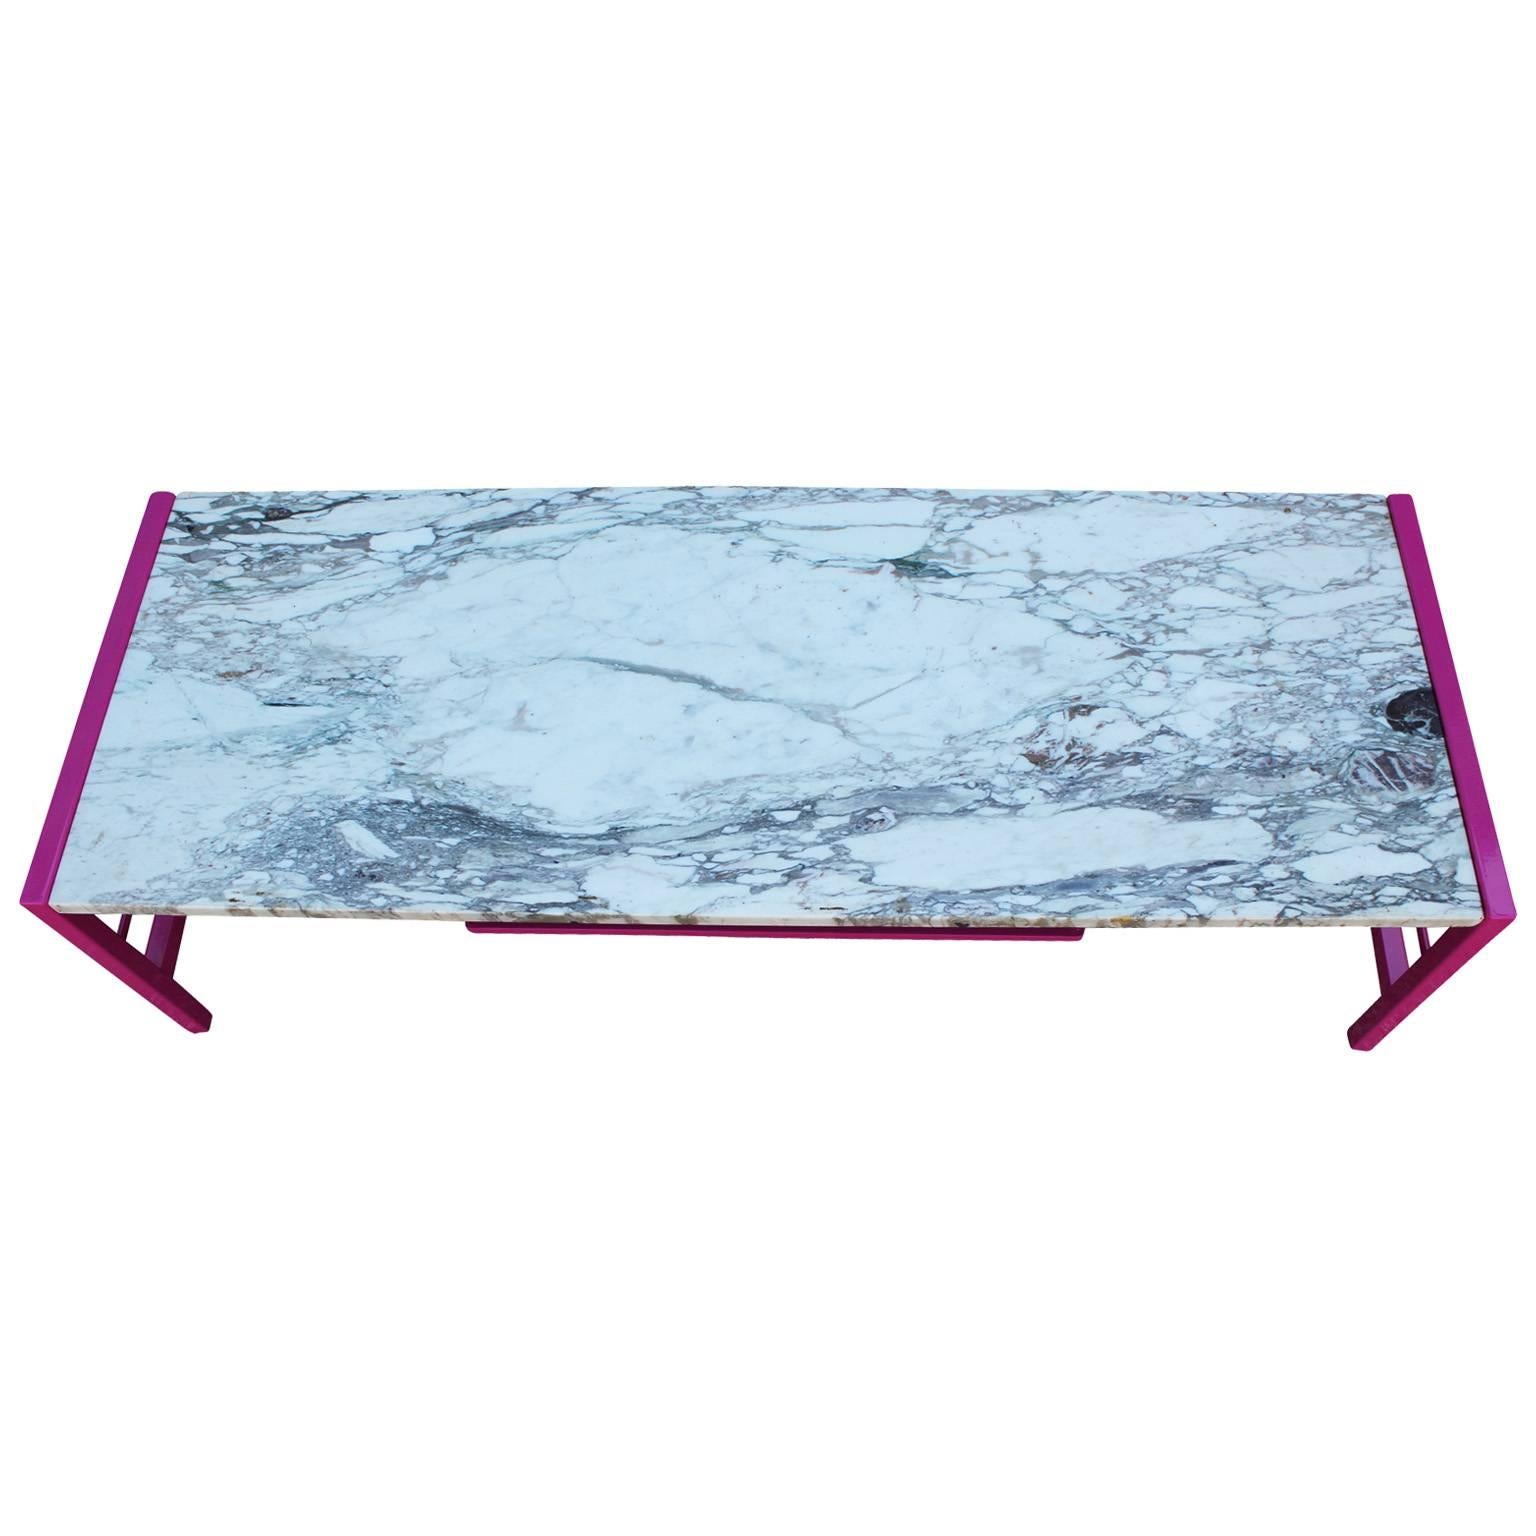 Mid-Century Modern Modern Carrara Rectangular Coffee Table with Marble Top and Hot Pink Base